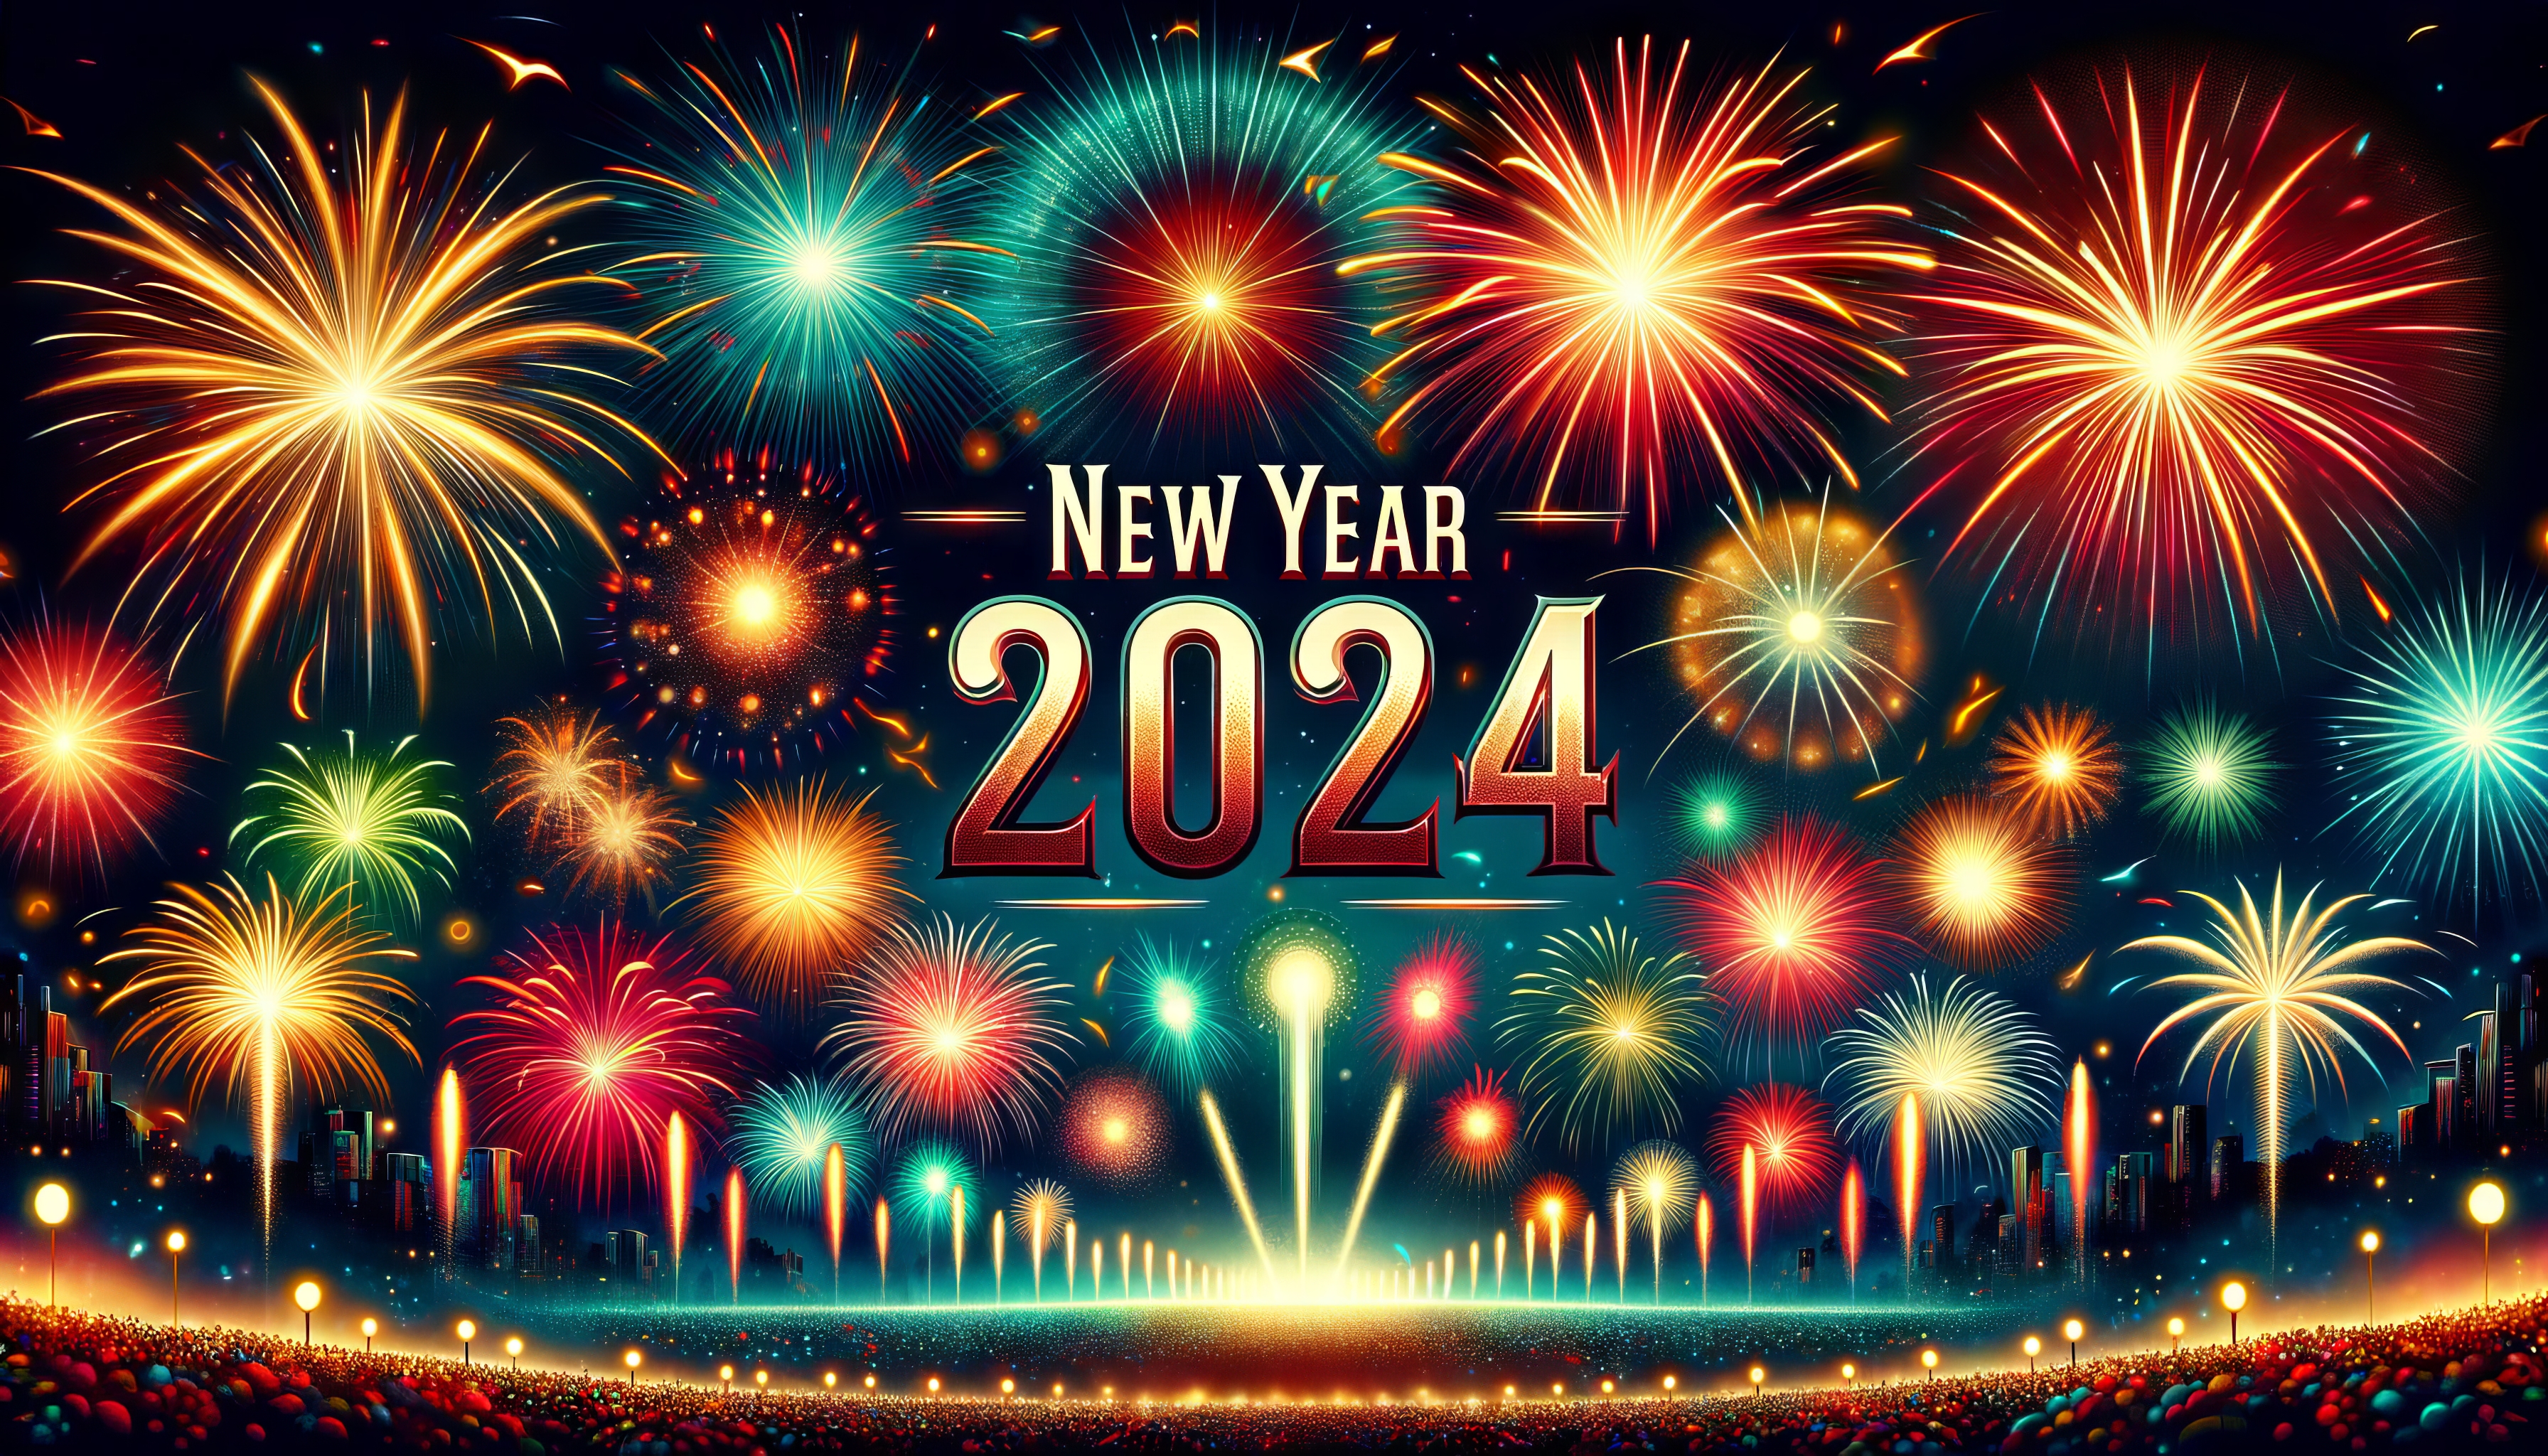 Colorful fireworks display with New Year 2024 text for HD desktop wallpaper and background.